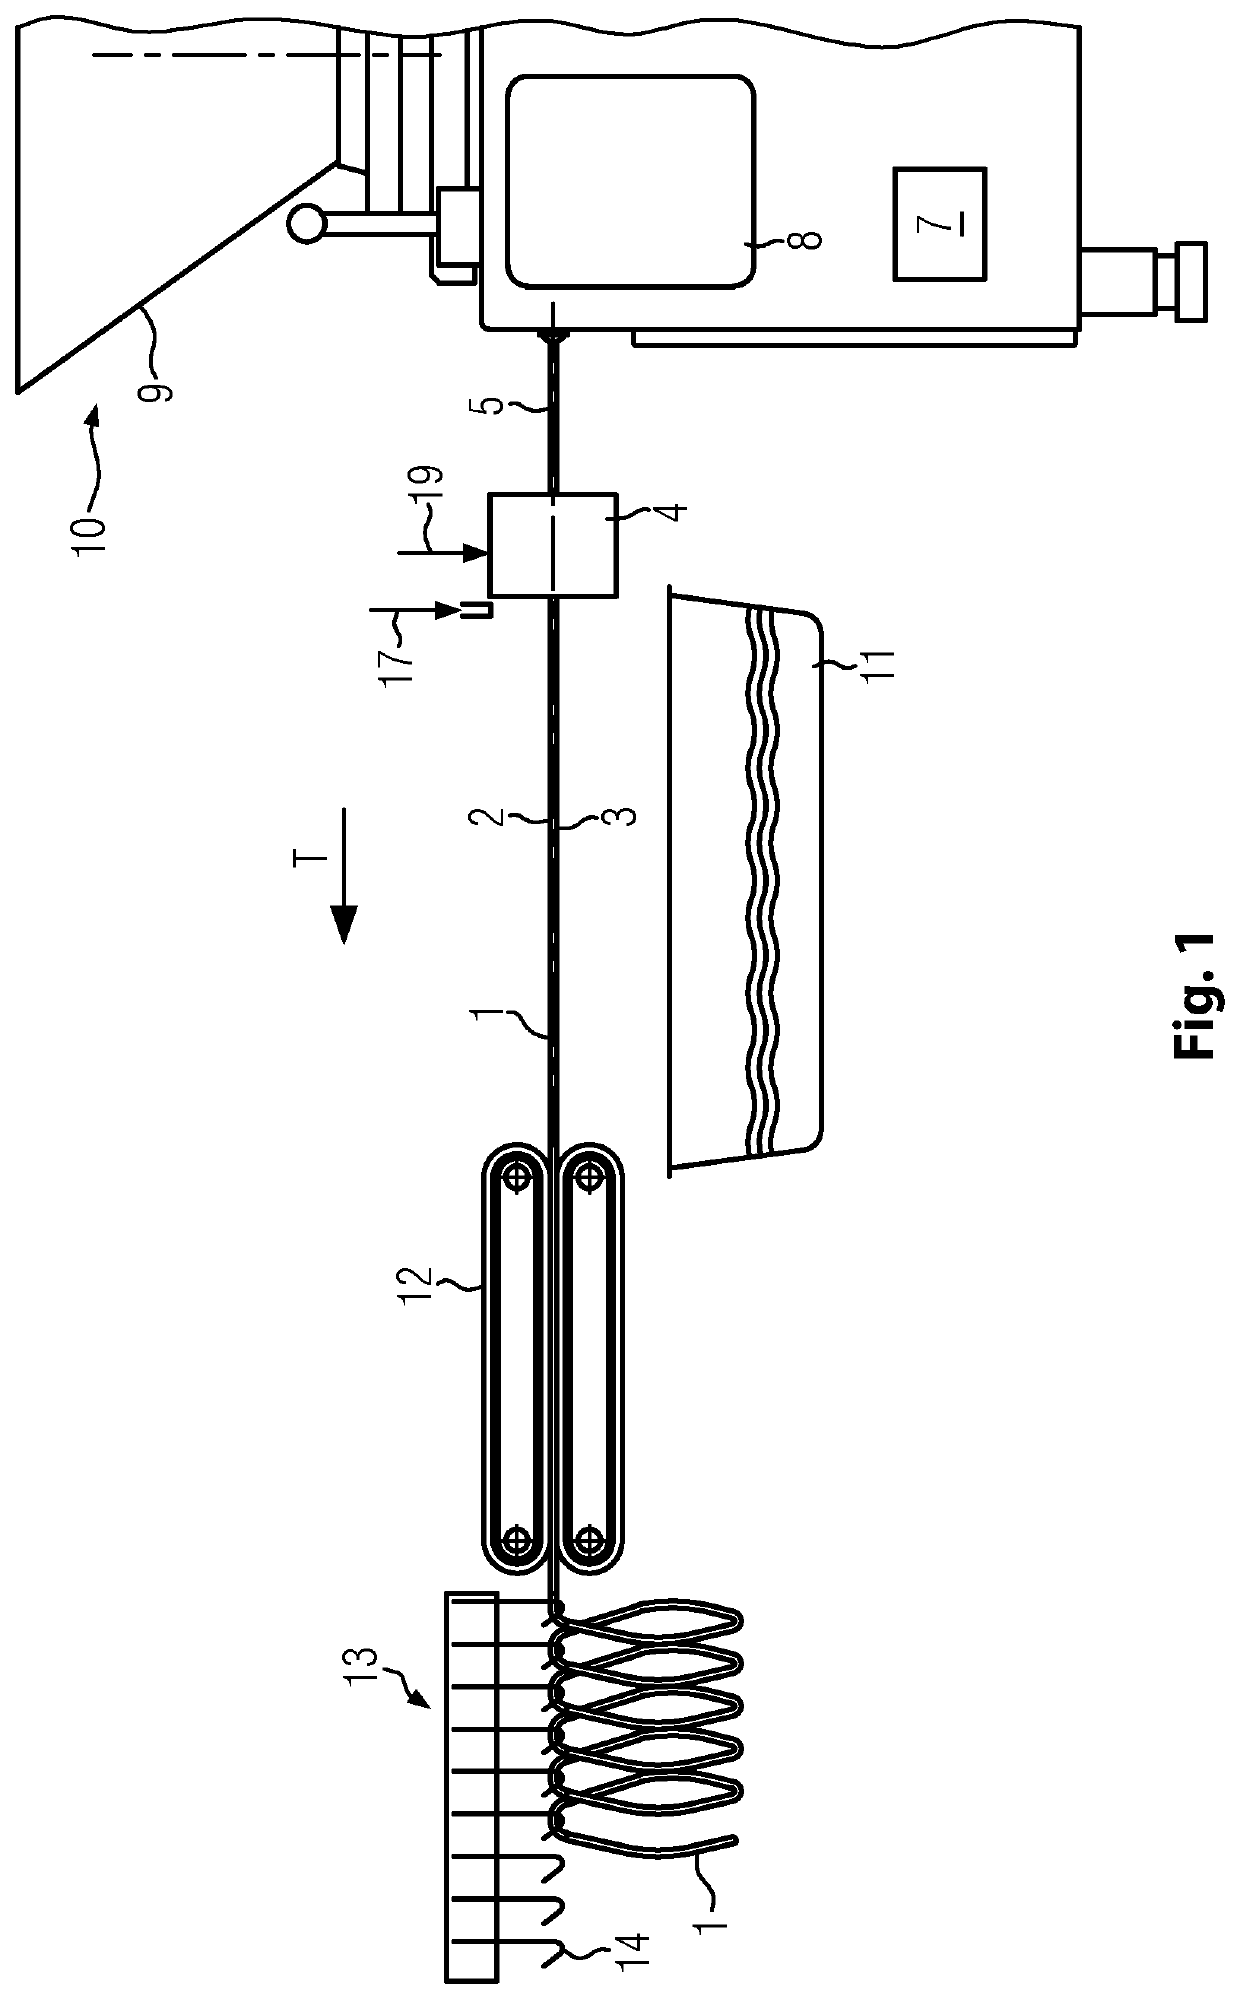 Apparatus and method for producing coextruded products with a variable thickness of the casing material